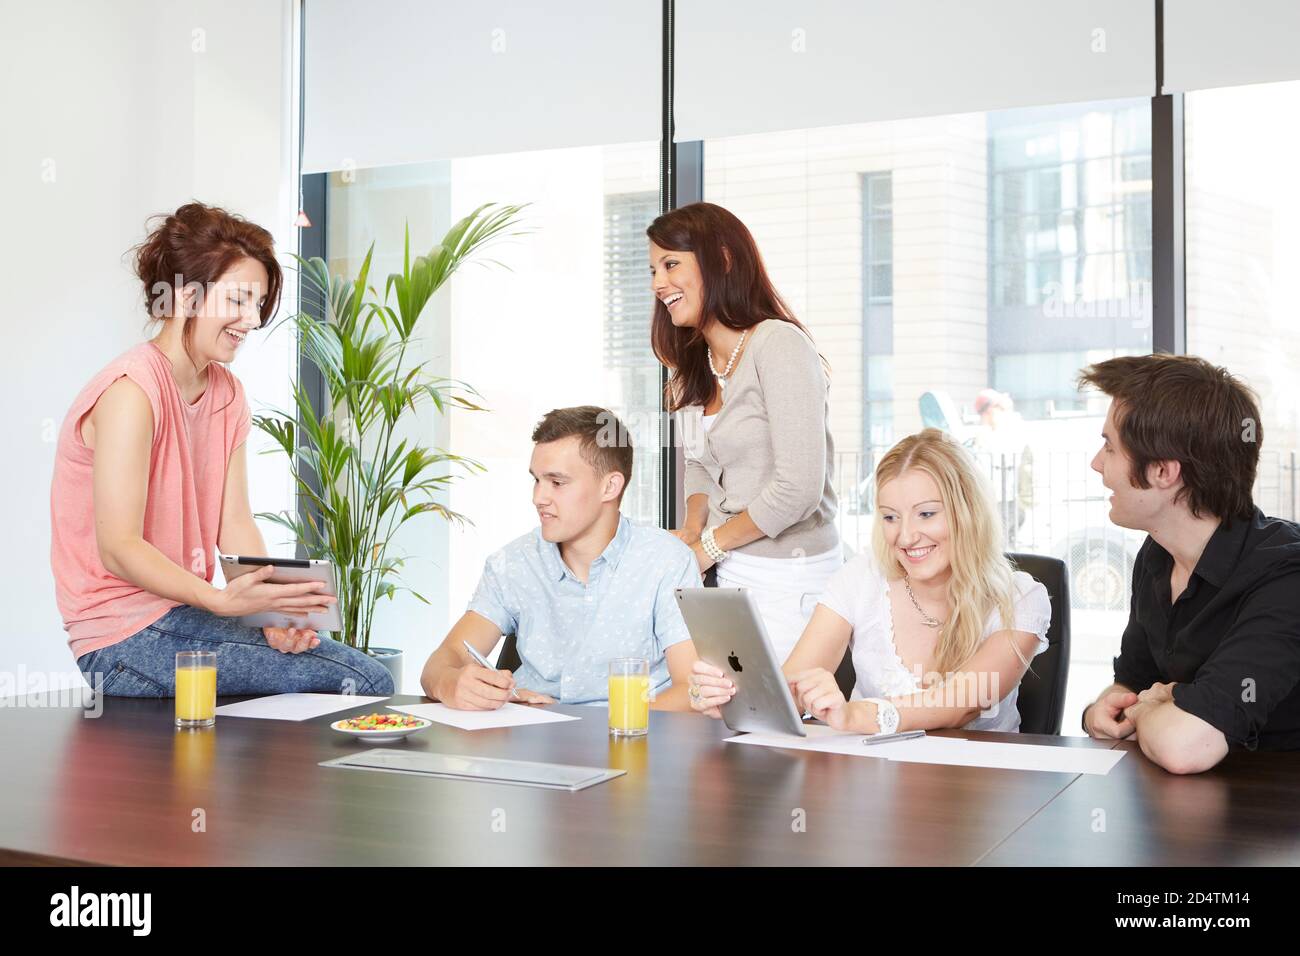 Group of young office workers Stock Photo